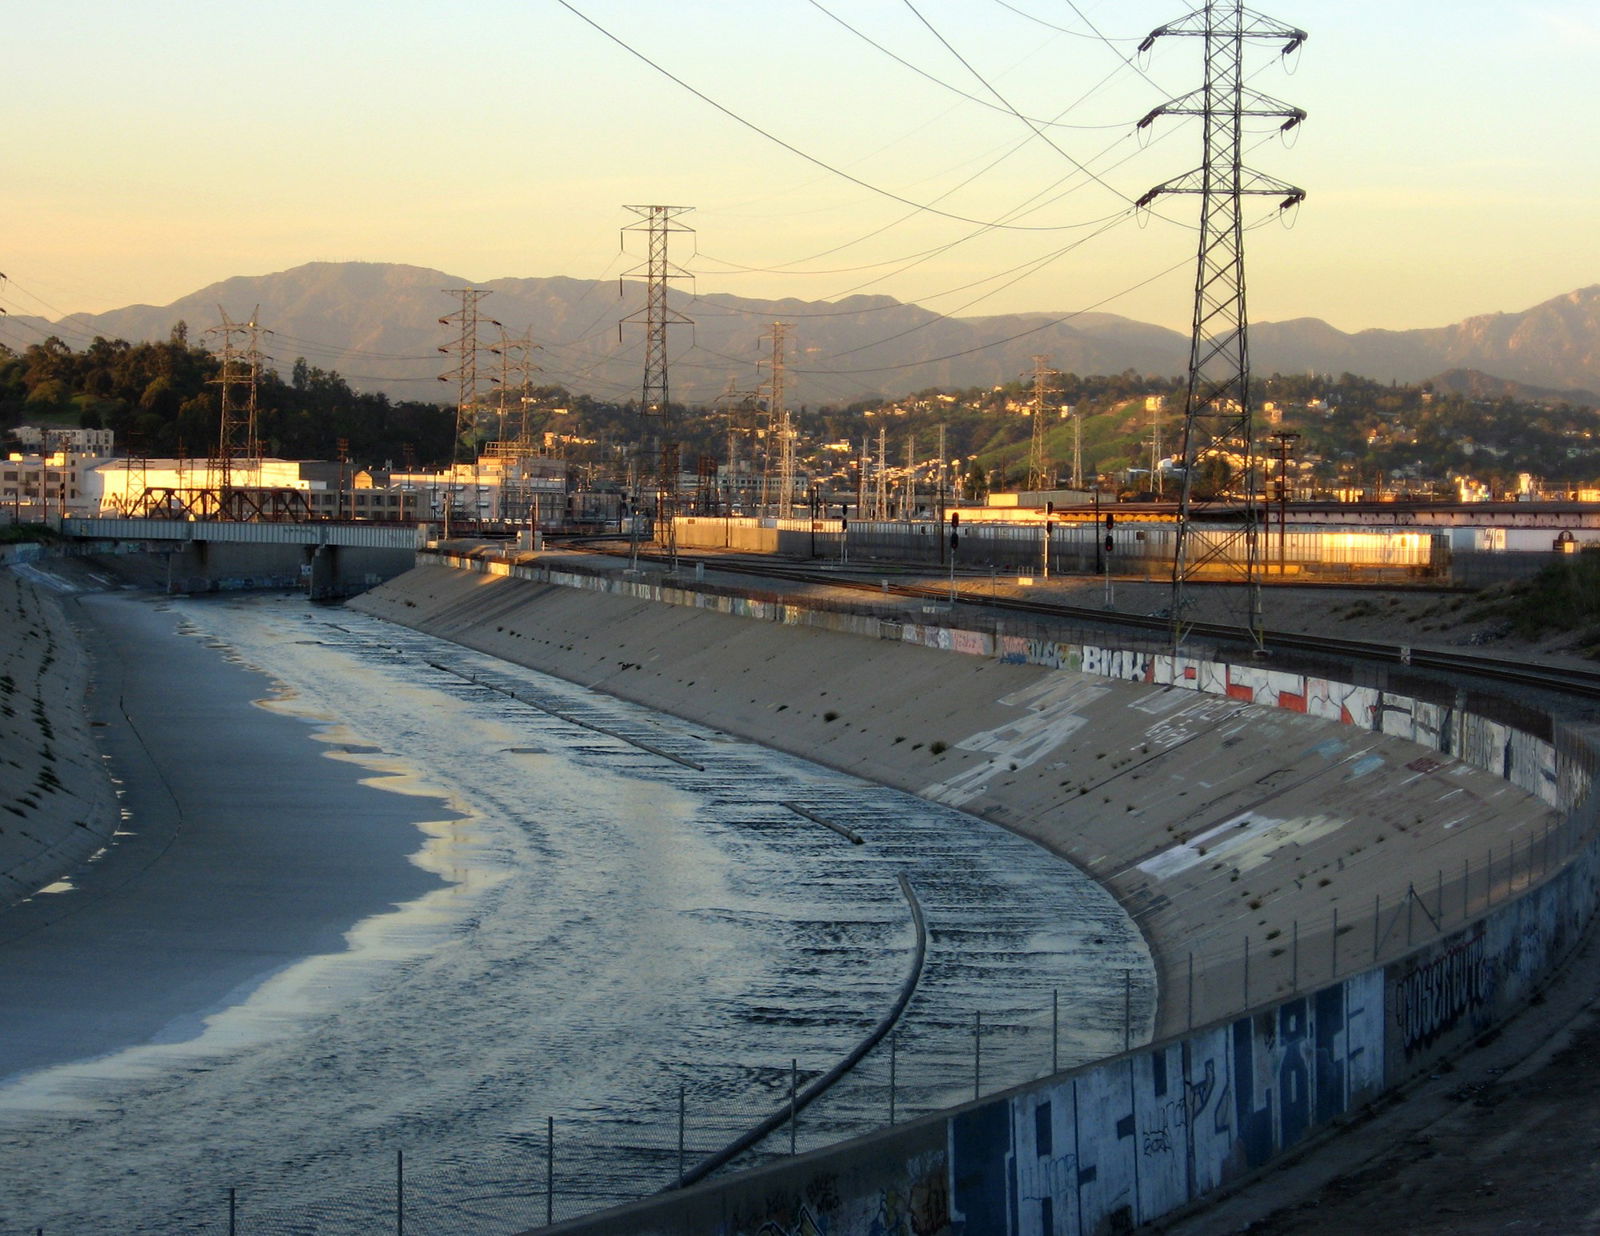 Shallow water in the Los Angeles River at sunset.